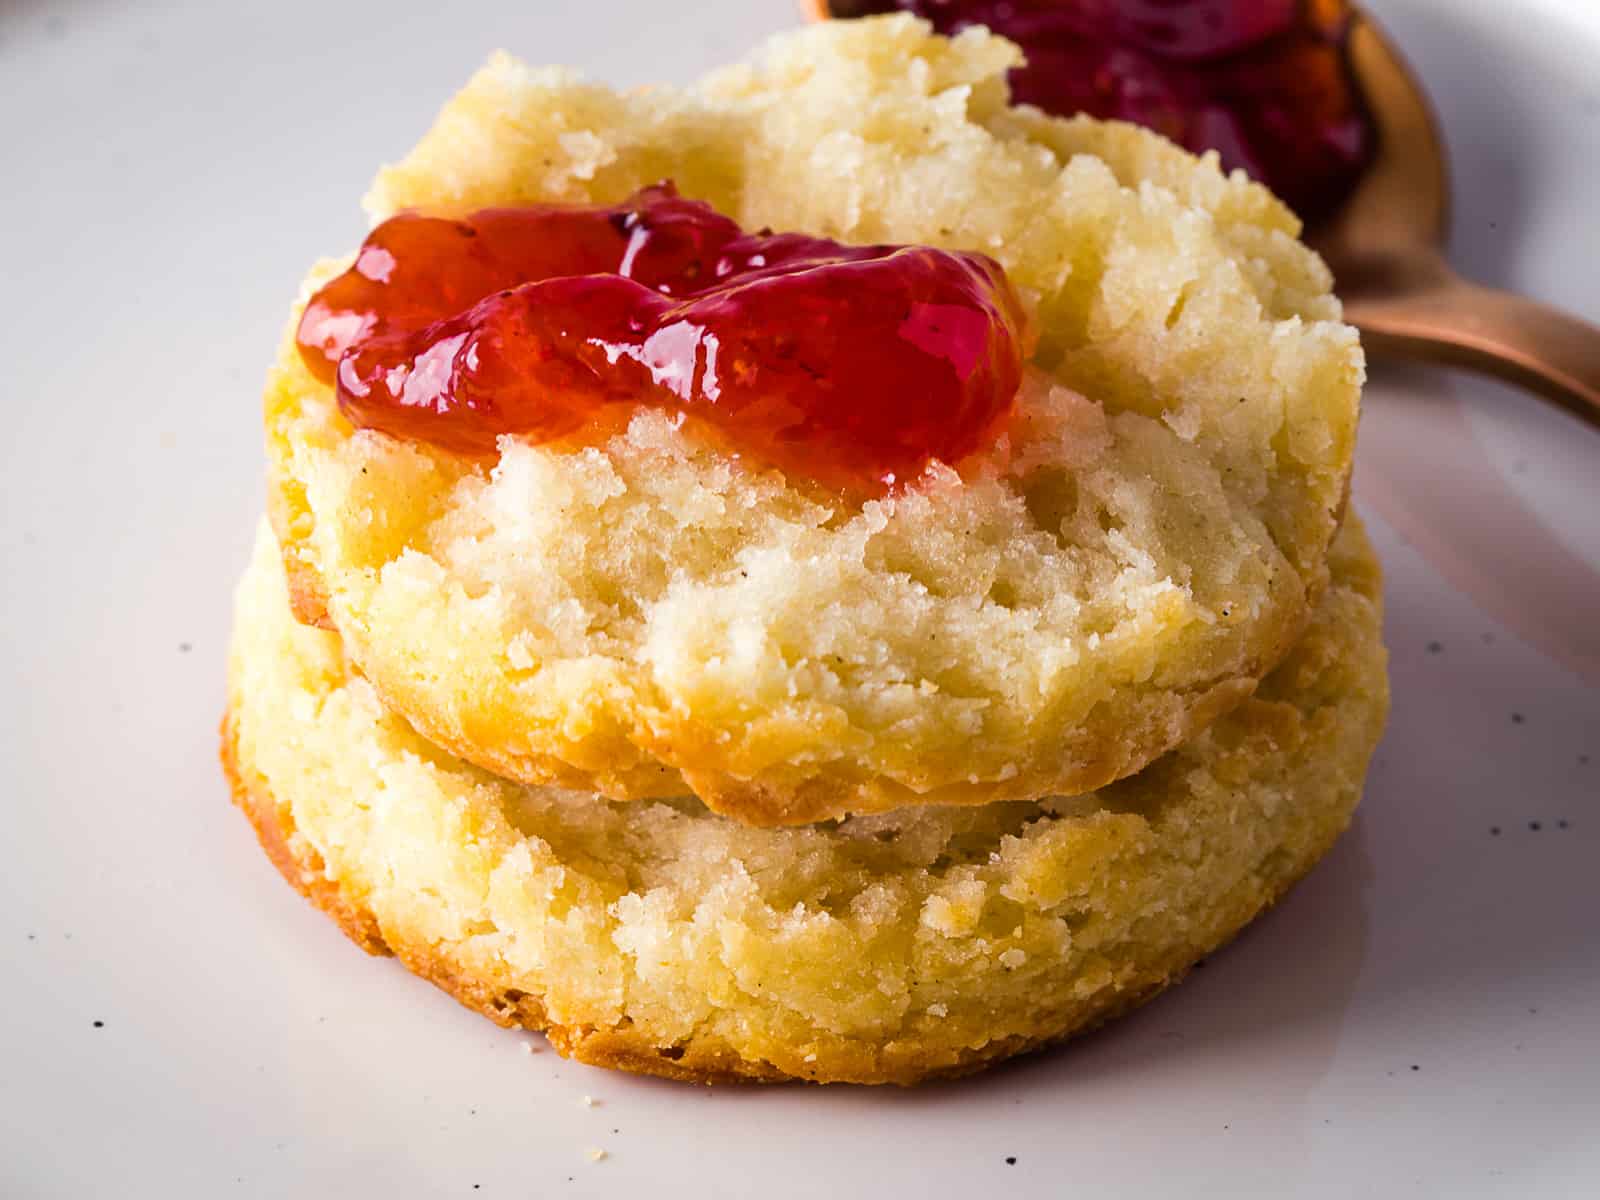 Gluten-free biscuit split in half with a dollop of jam on top.